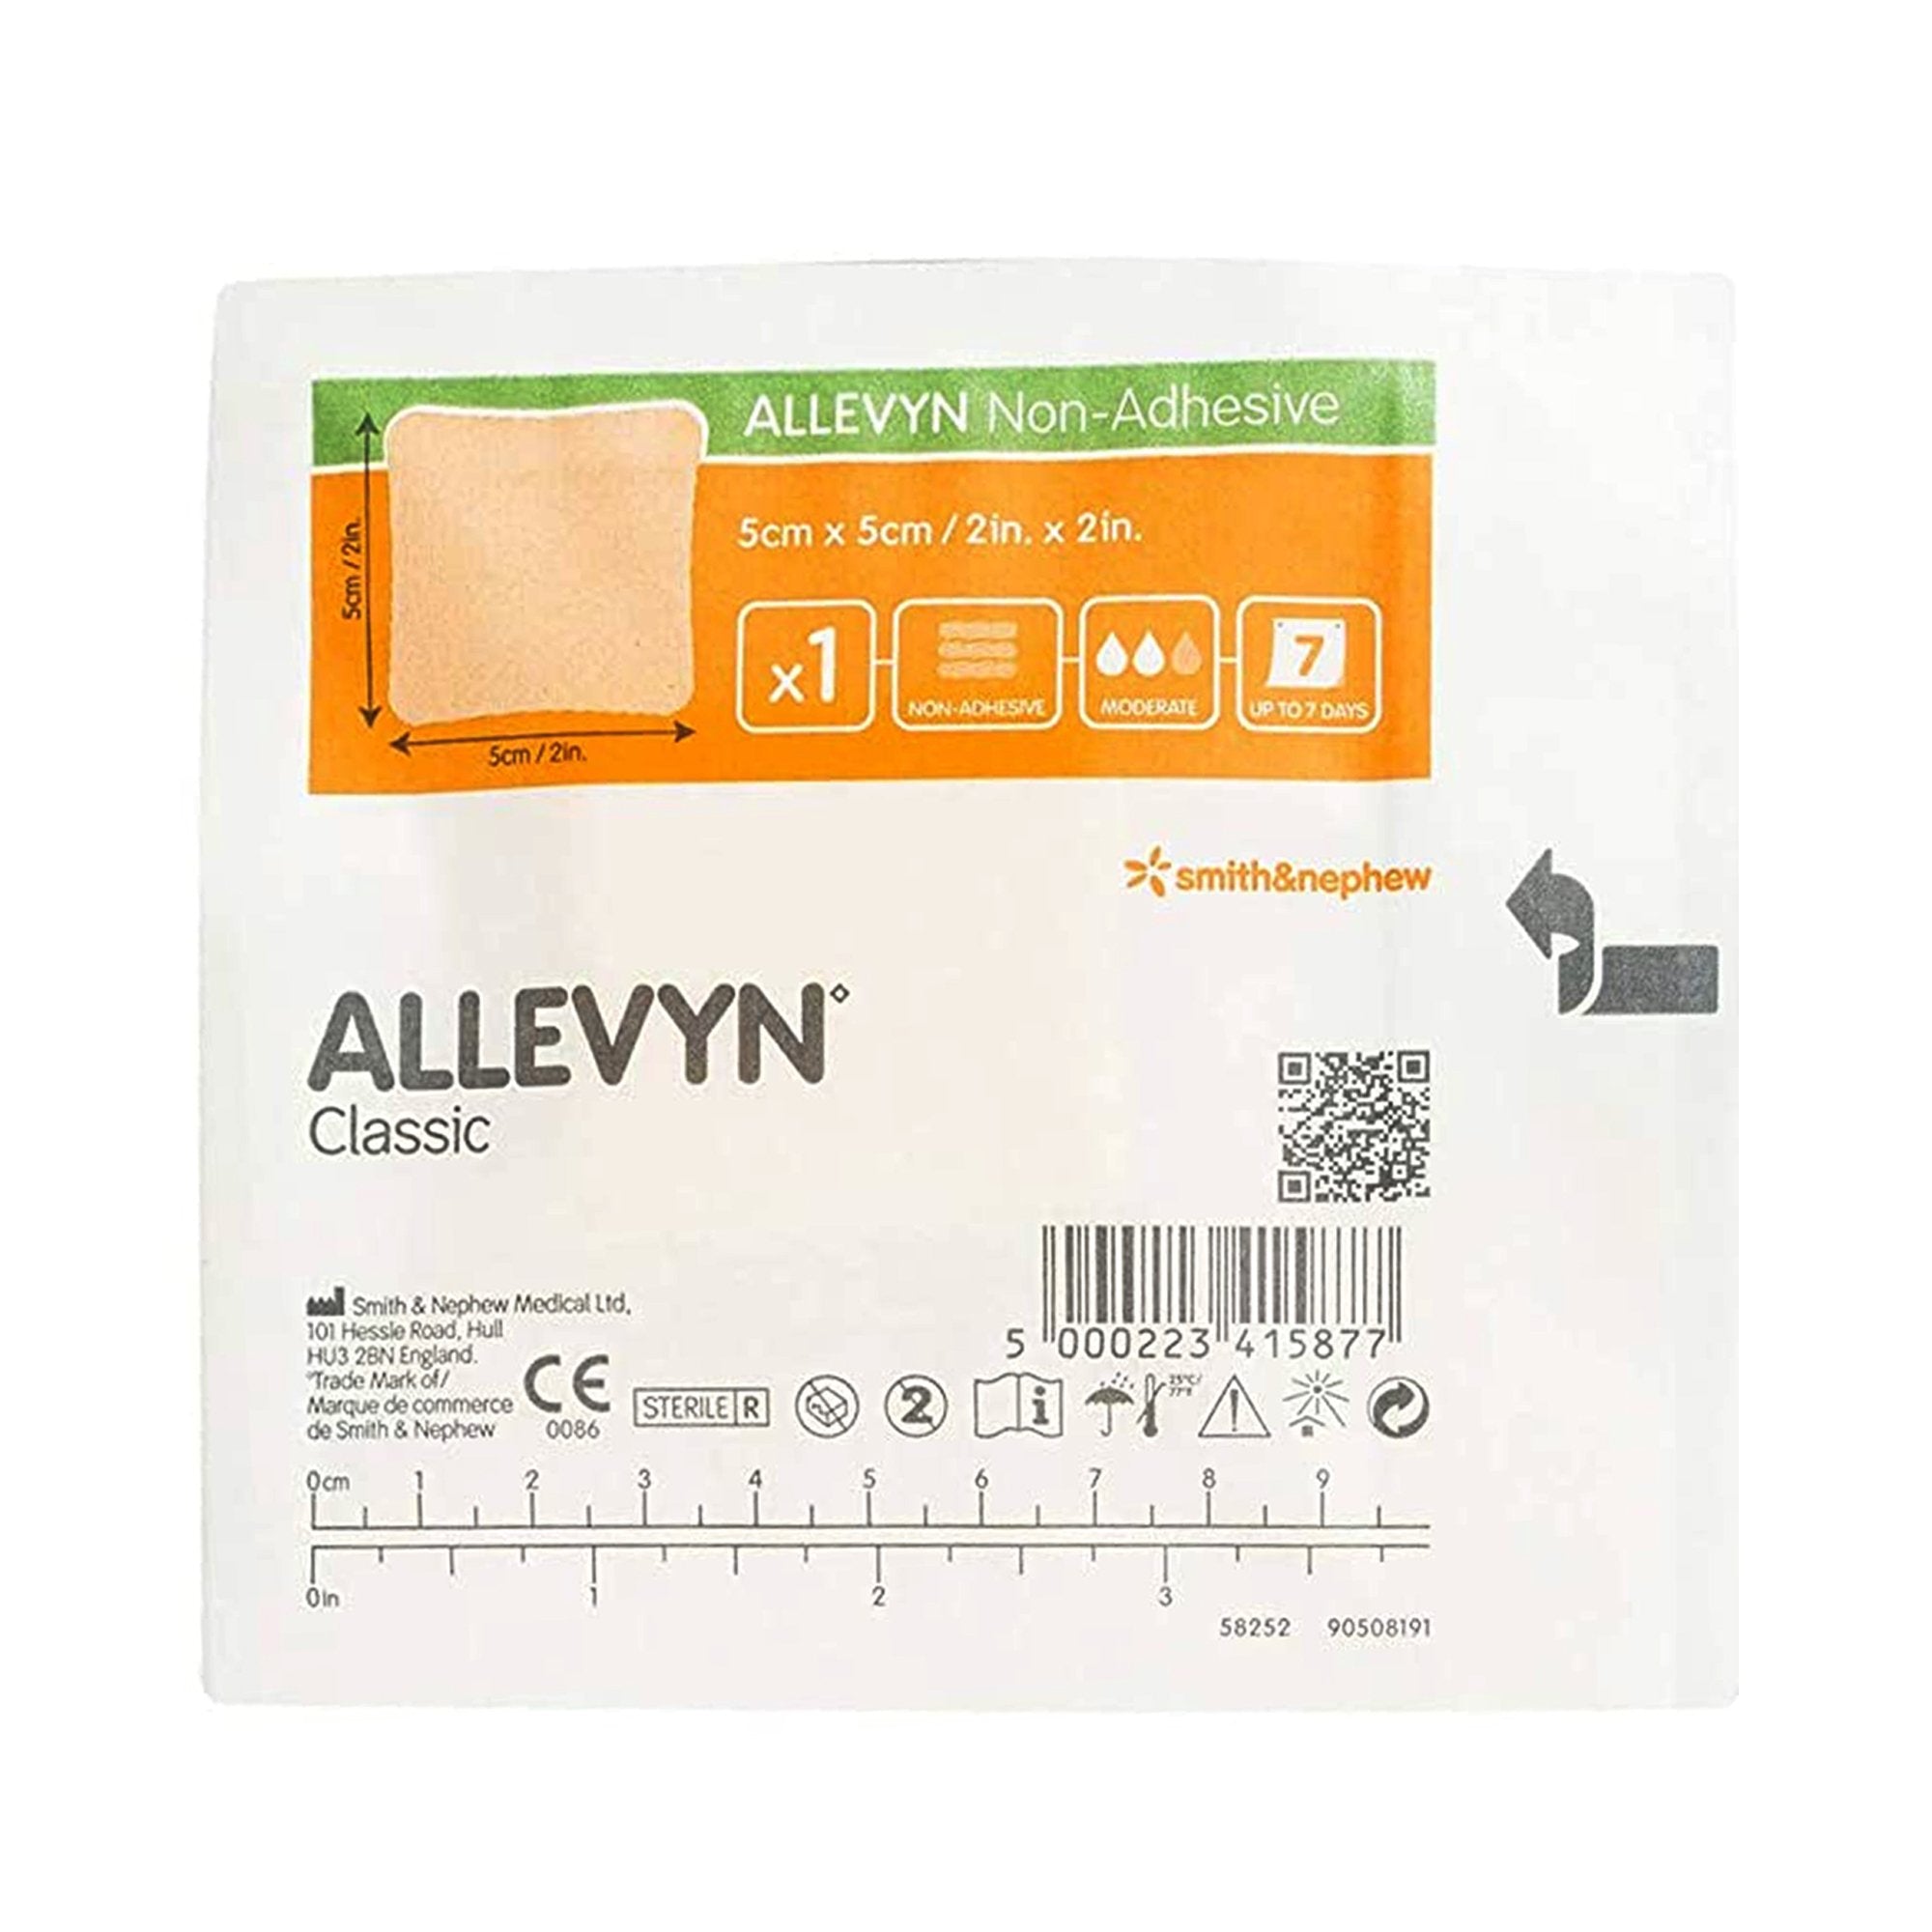 Foam Dressing Allevyn 2 X 2 Inch Without Border Film Backing Nonadhesive Square Sterile